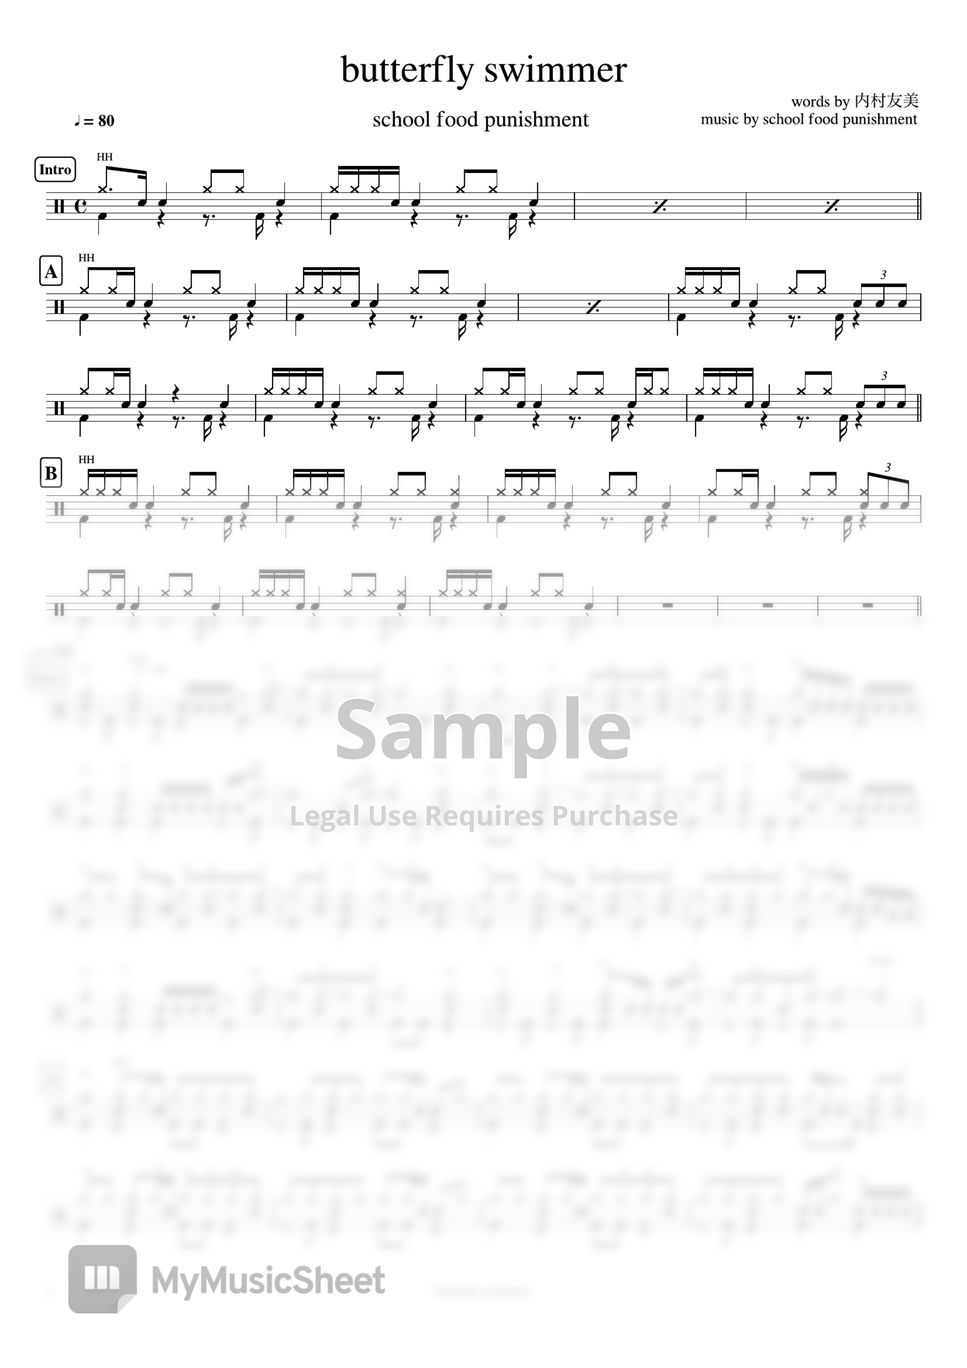 school food punishment - butterfly swimmer by Cookai's J-pop Drum sheet  music!!!